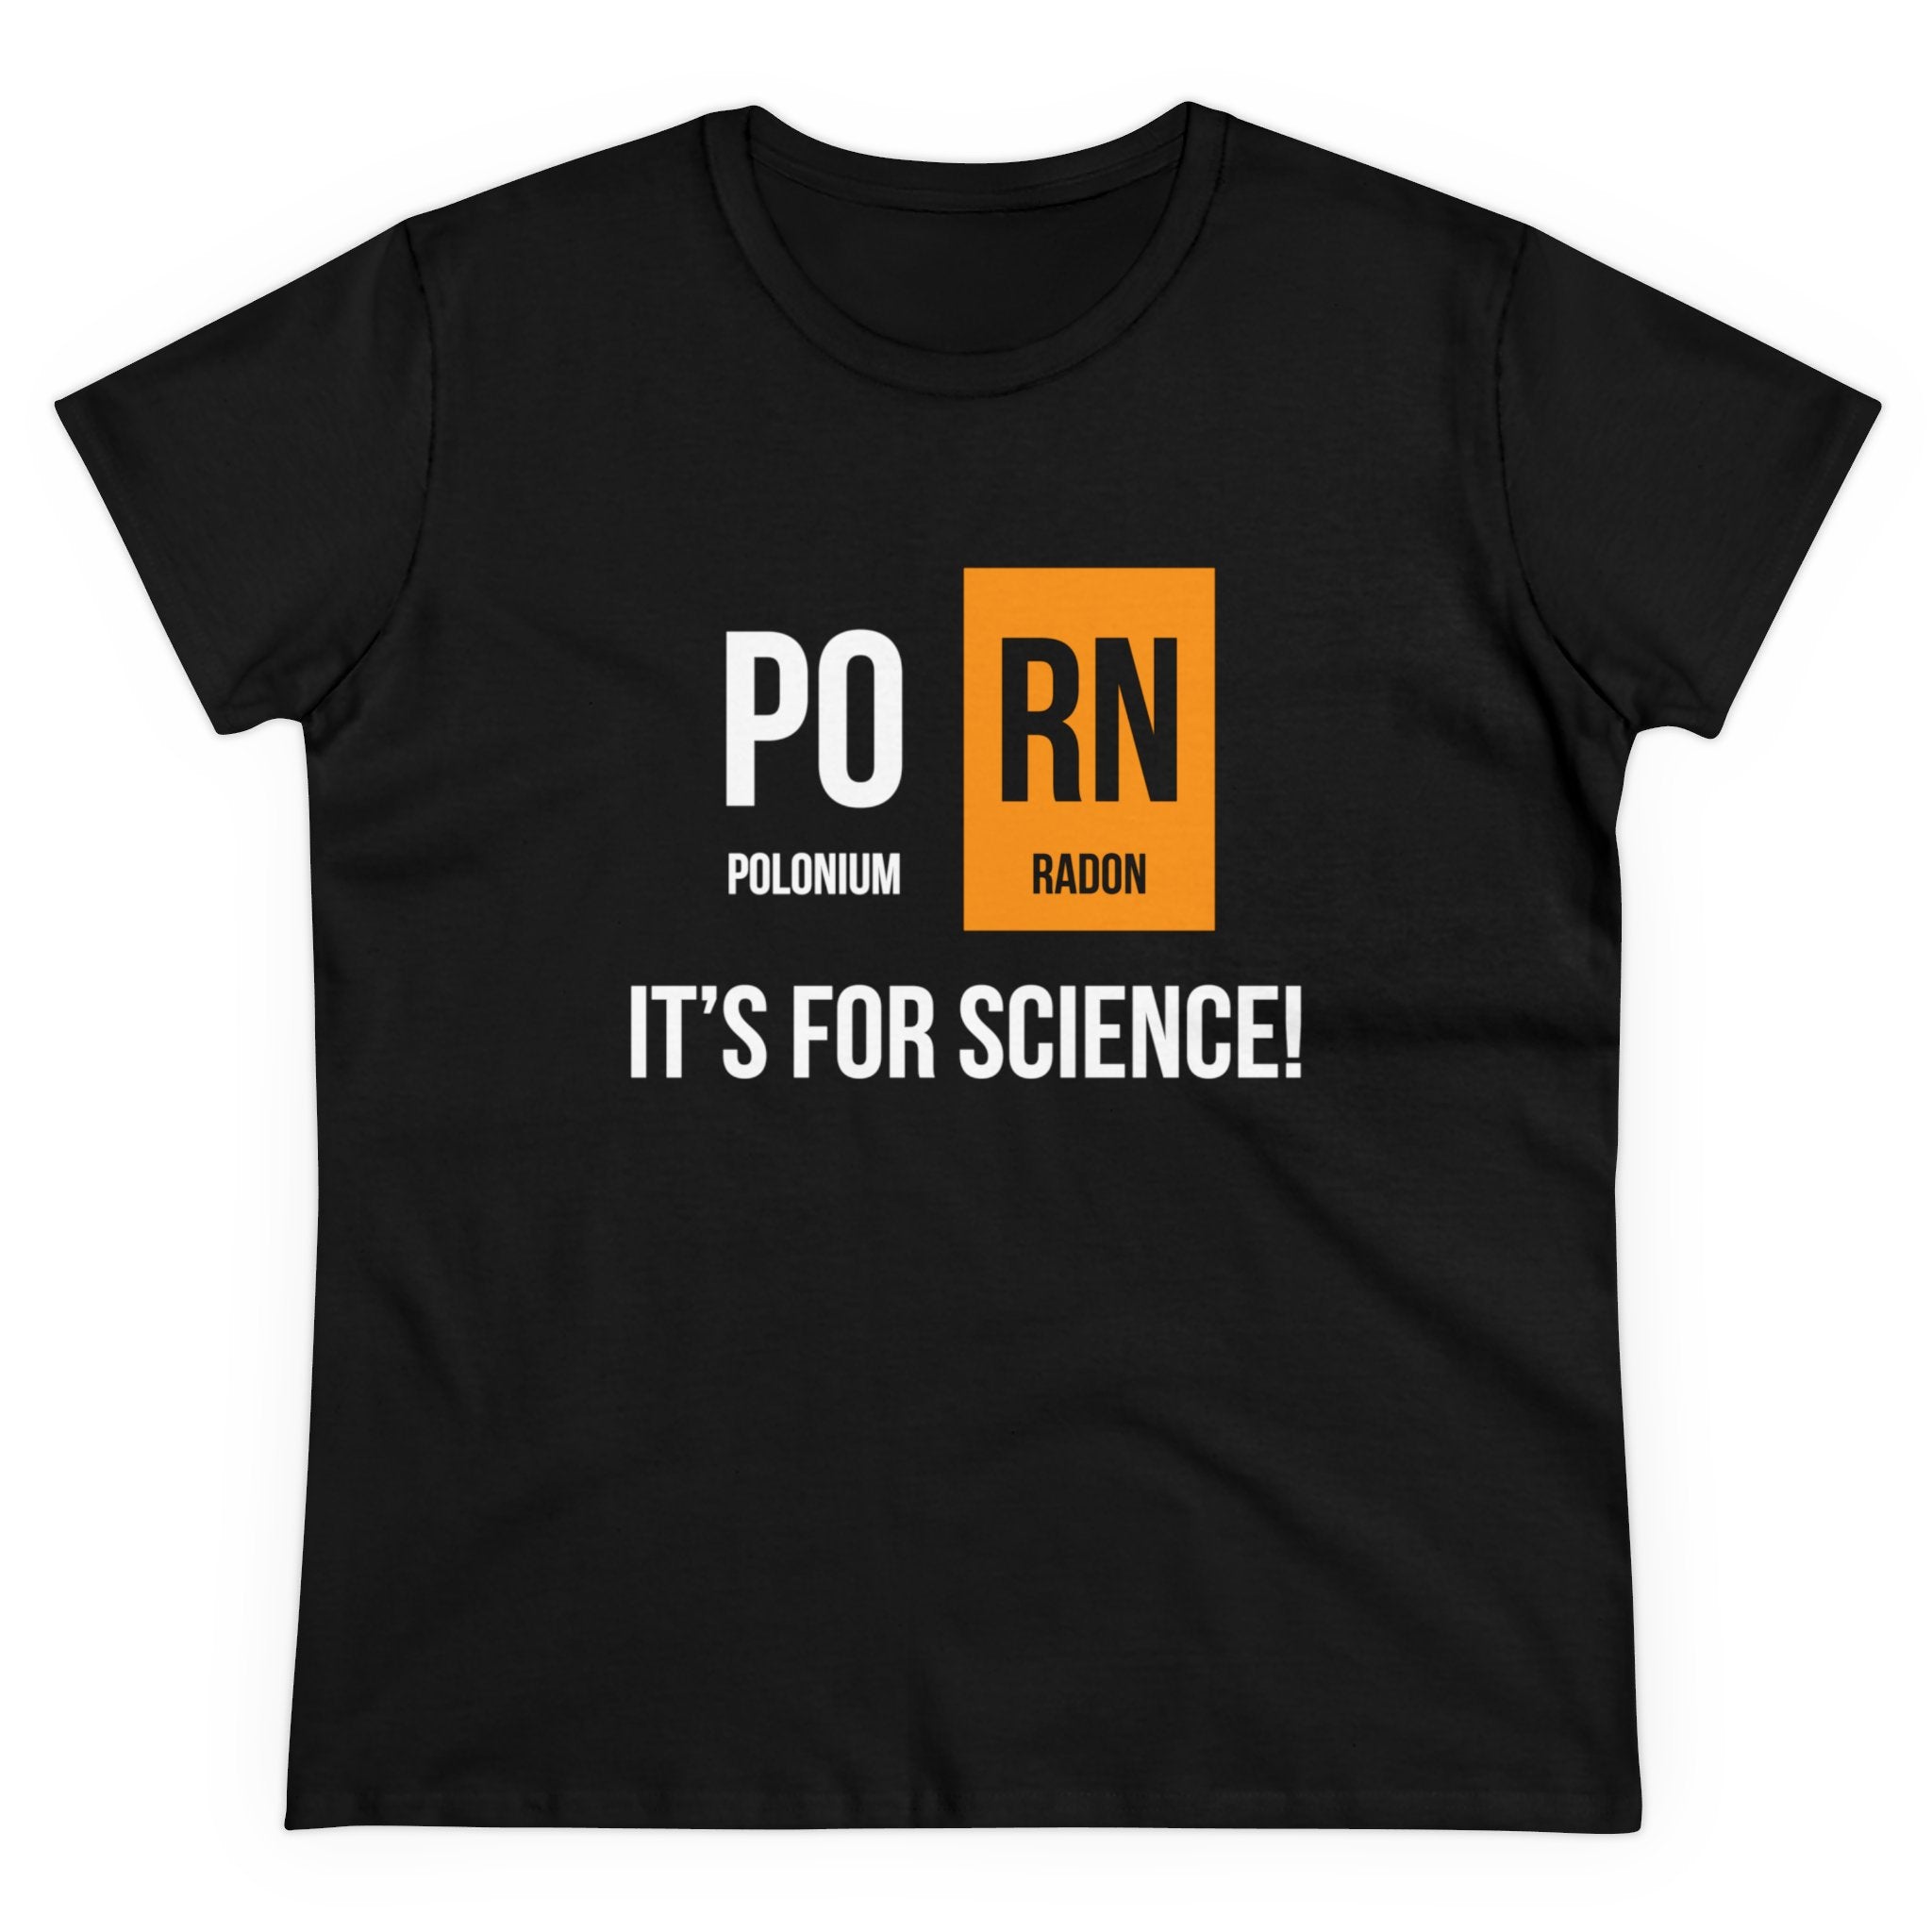 PO-RN - Women's Tee: A sustainable black women's tee displaying the text "PO RN" with "PO" labeled as Polonium and "RN" as Radon, along with the phrase "It's for science!" underneath. Crafted from soft cotton for ultimate comfort.